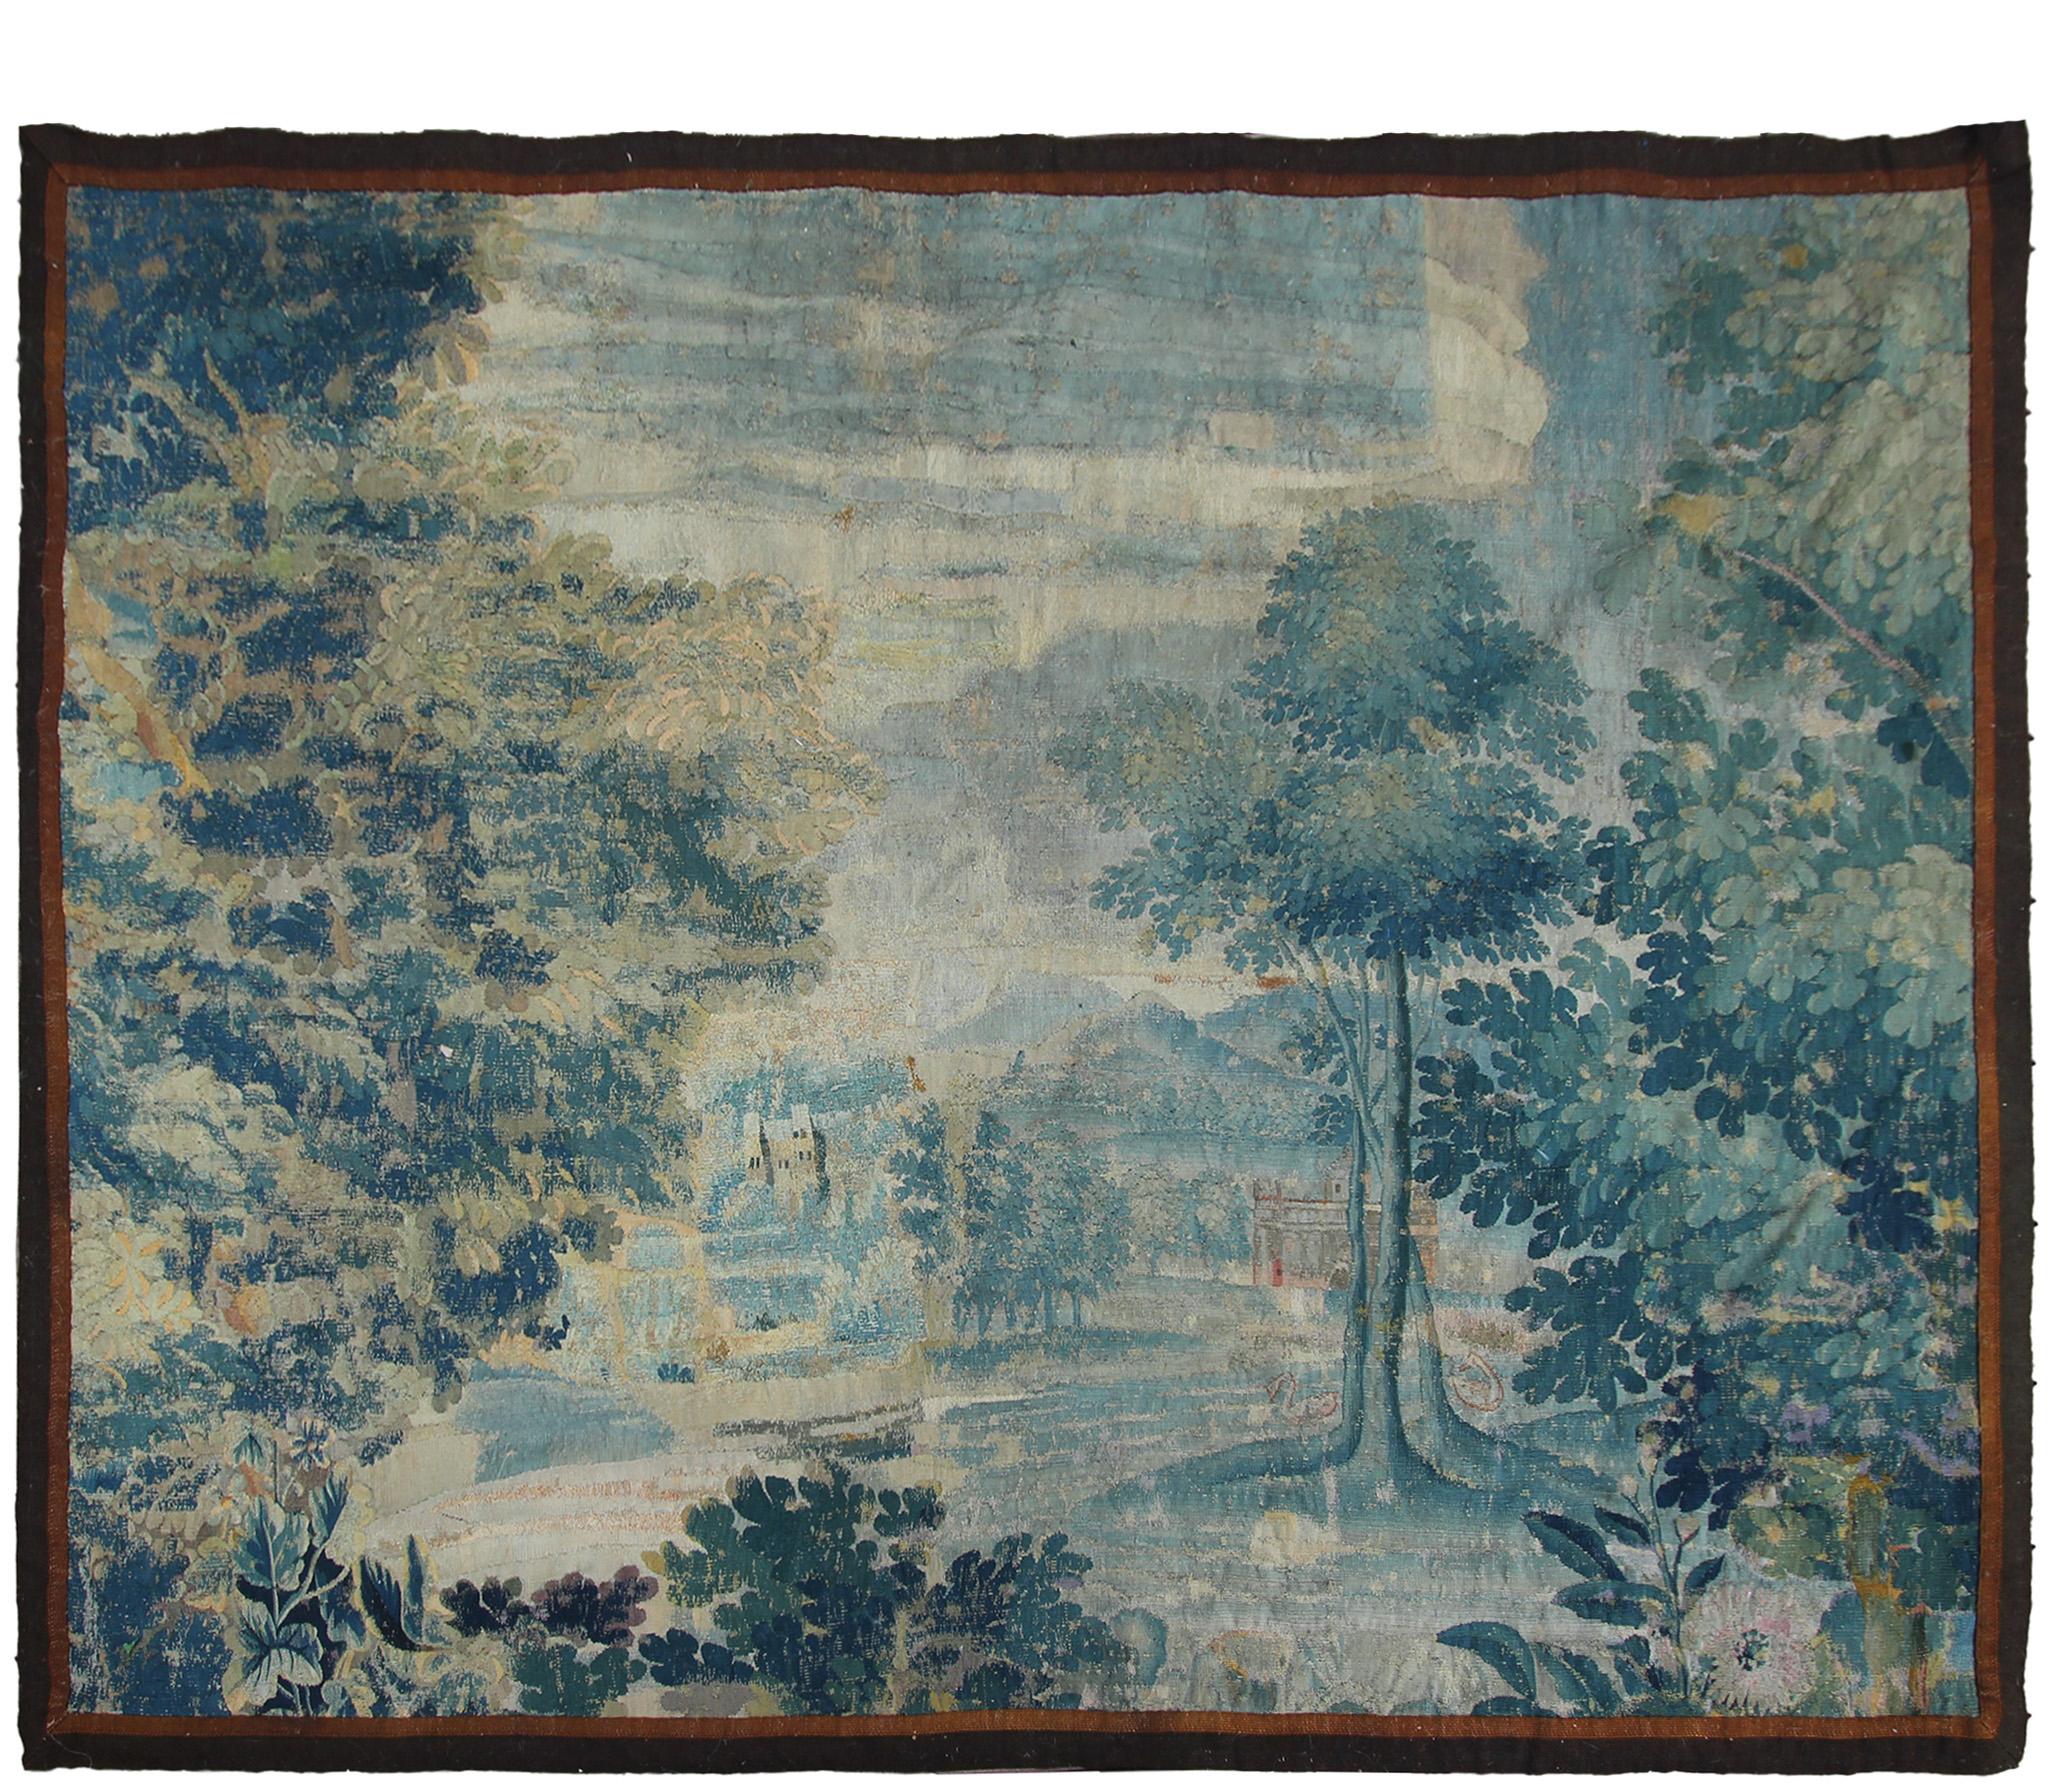 Antique French Tapestry 18th Century Handwoven Wool & Silk 5x6 143cm x 183cm